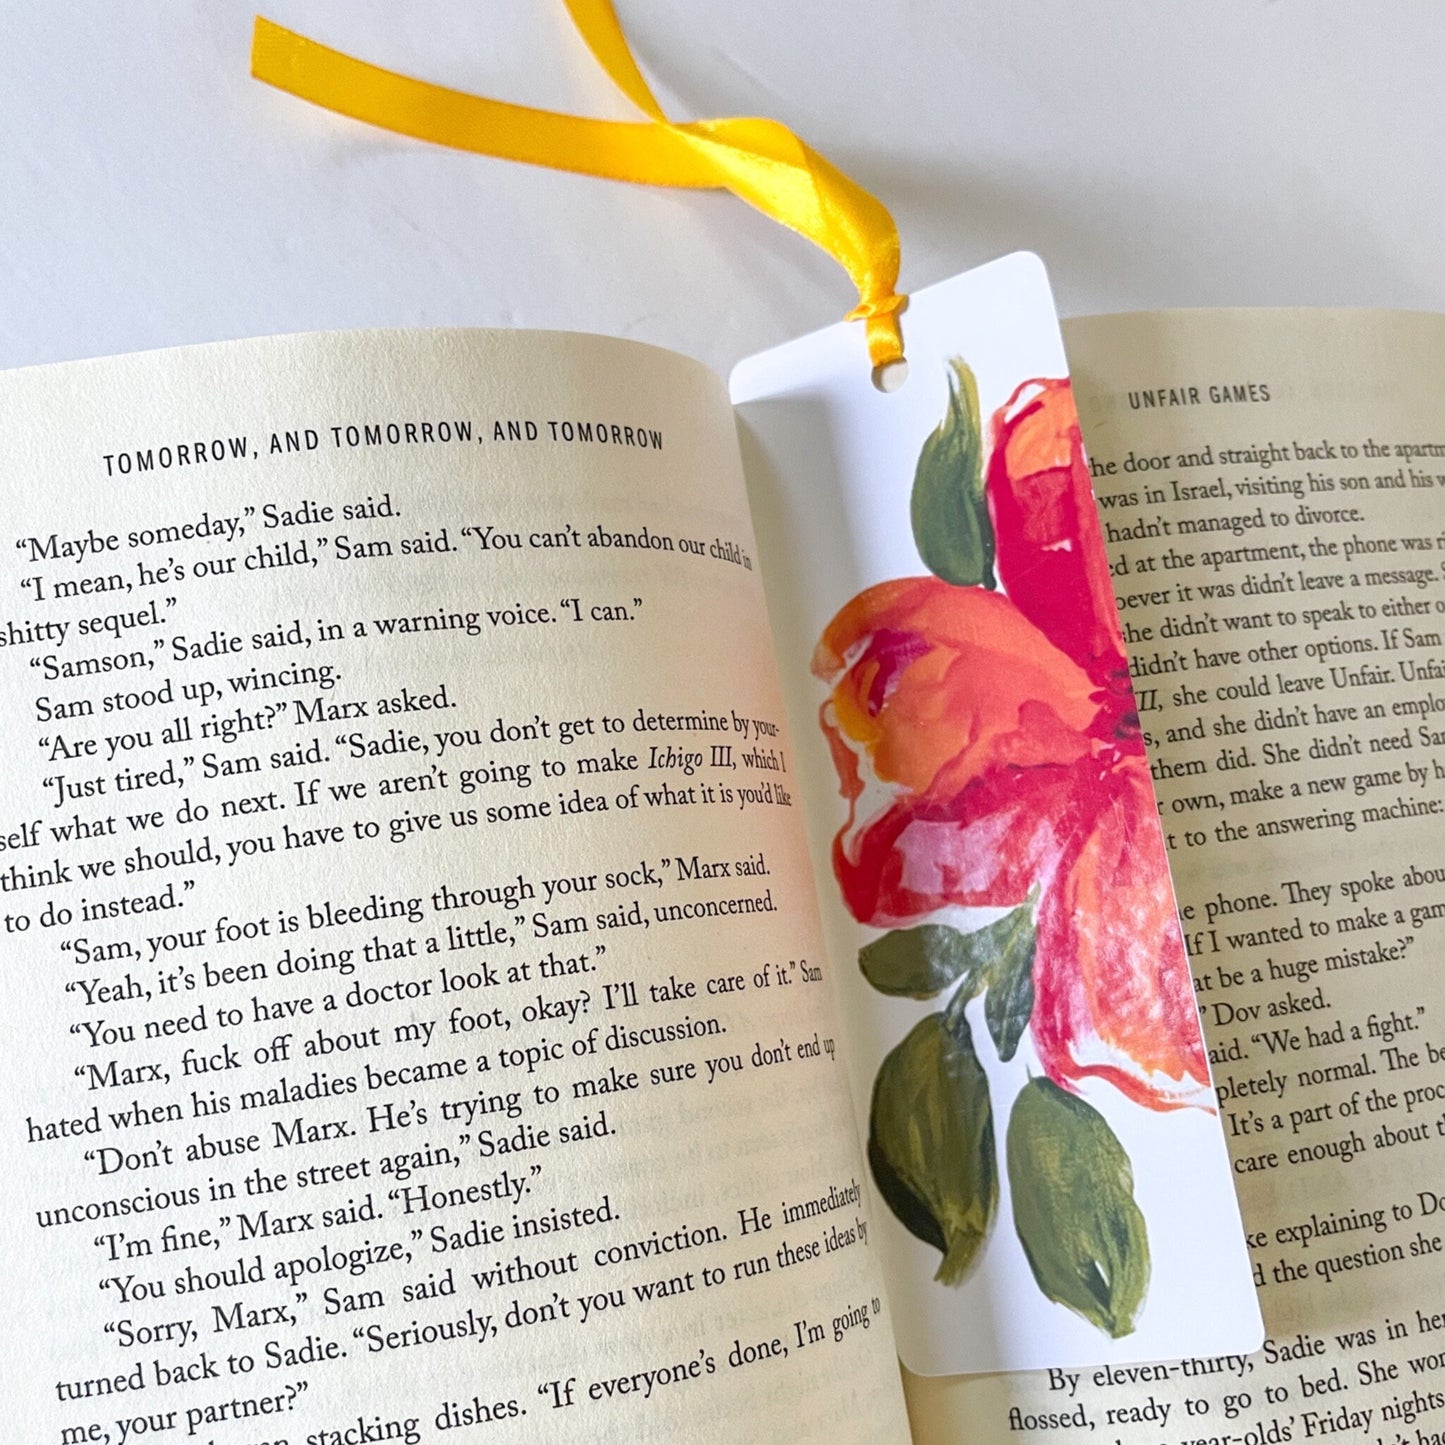 Art Bookmark "Expressive Floral" - 2x6 inches High Glossy Finish